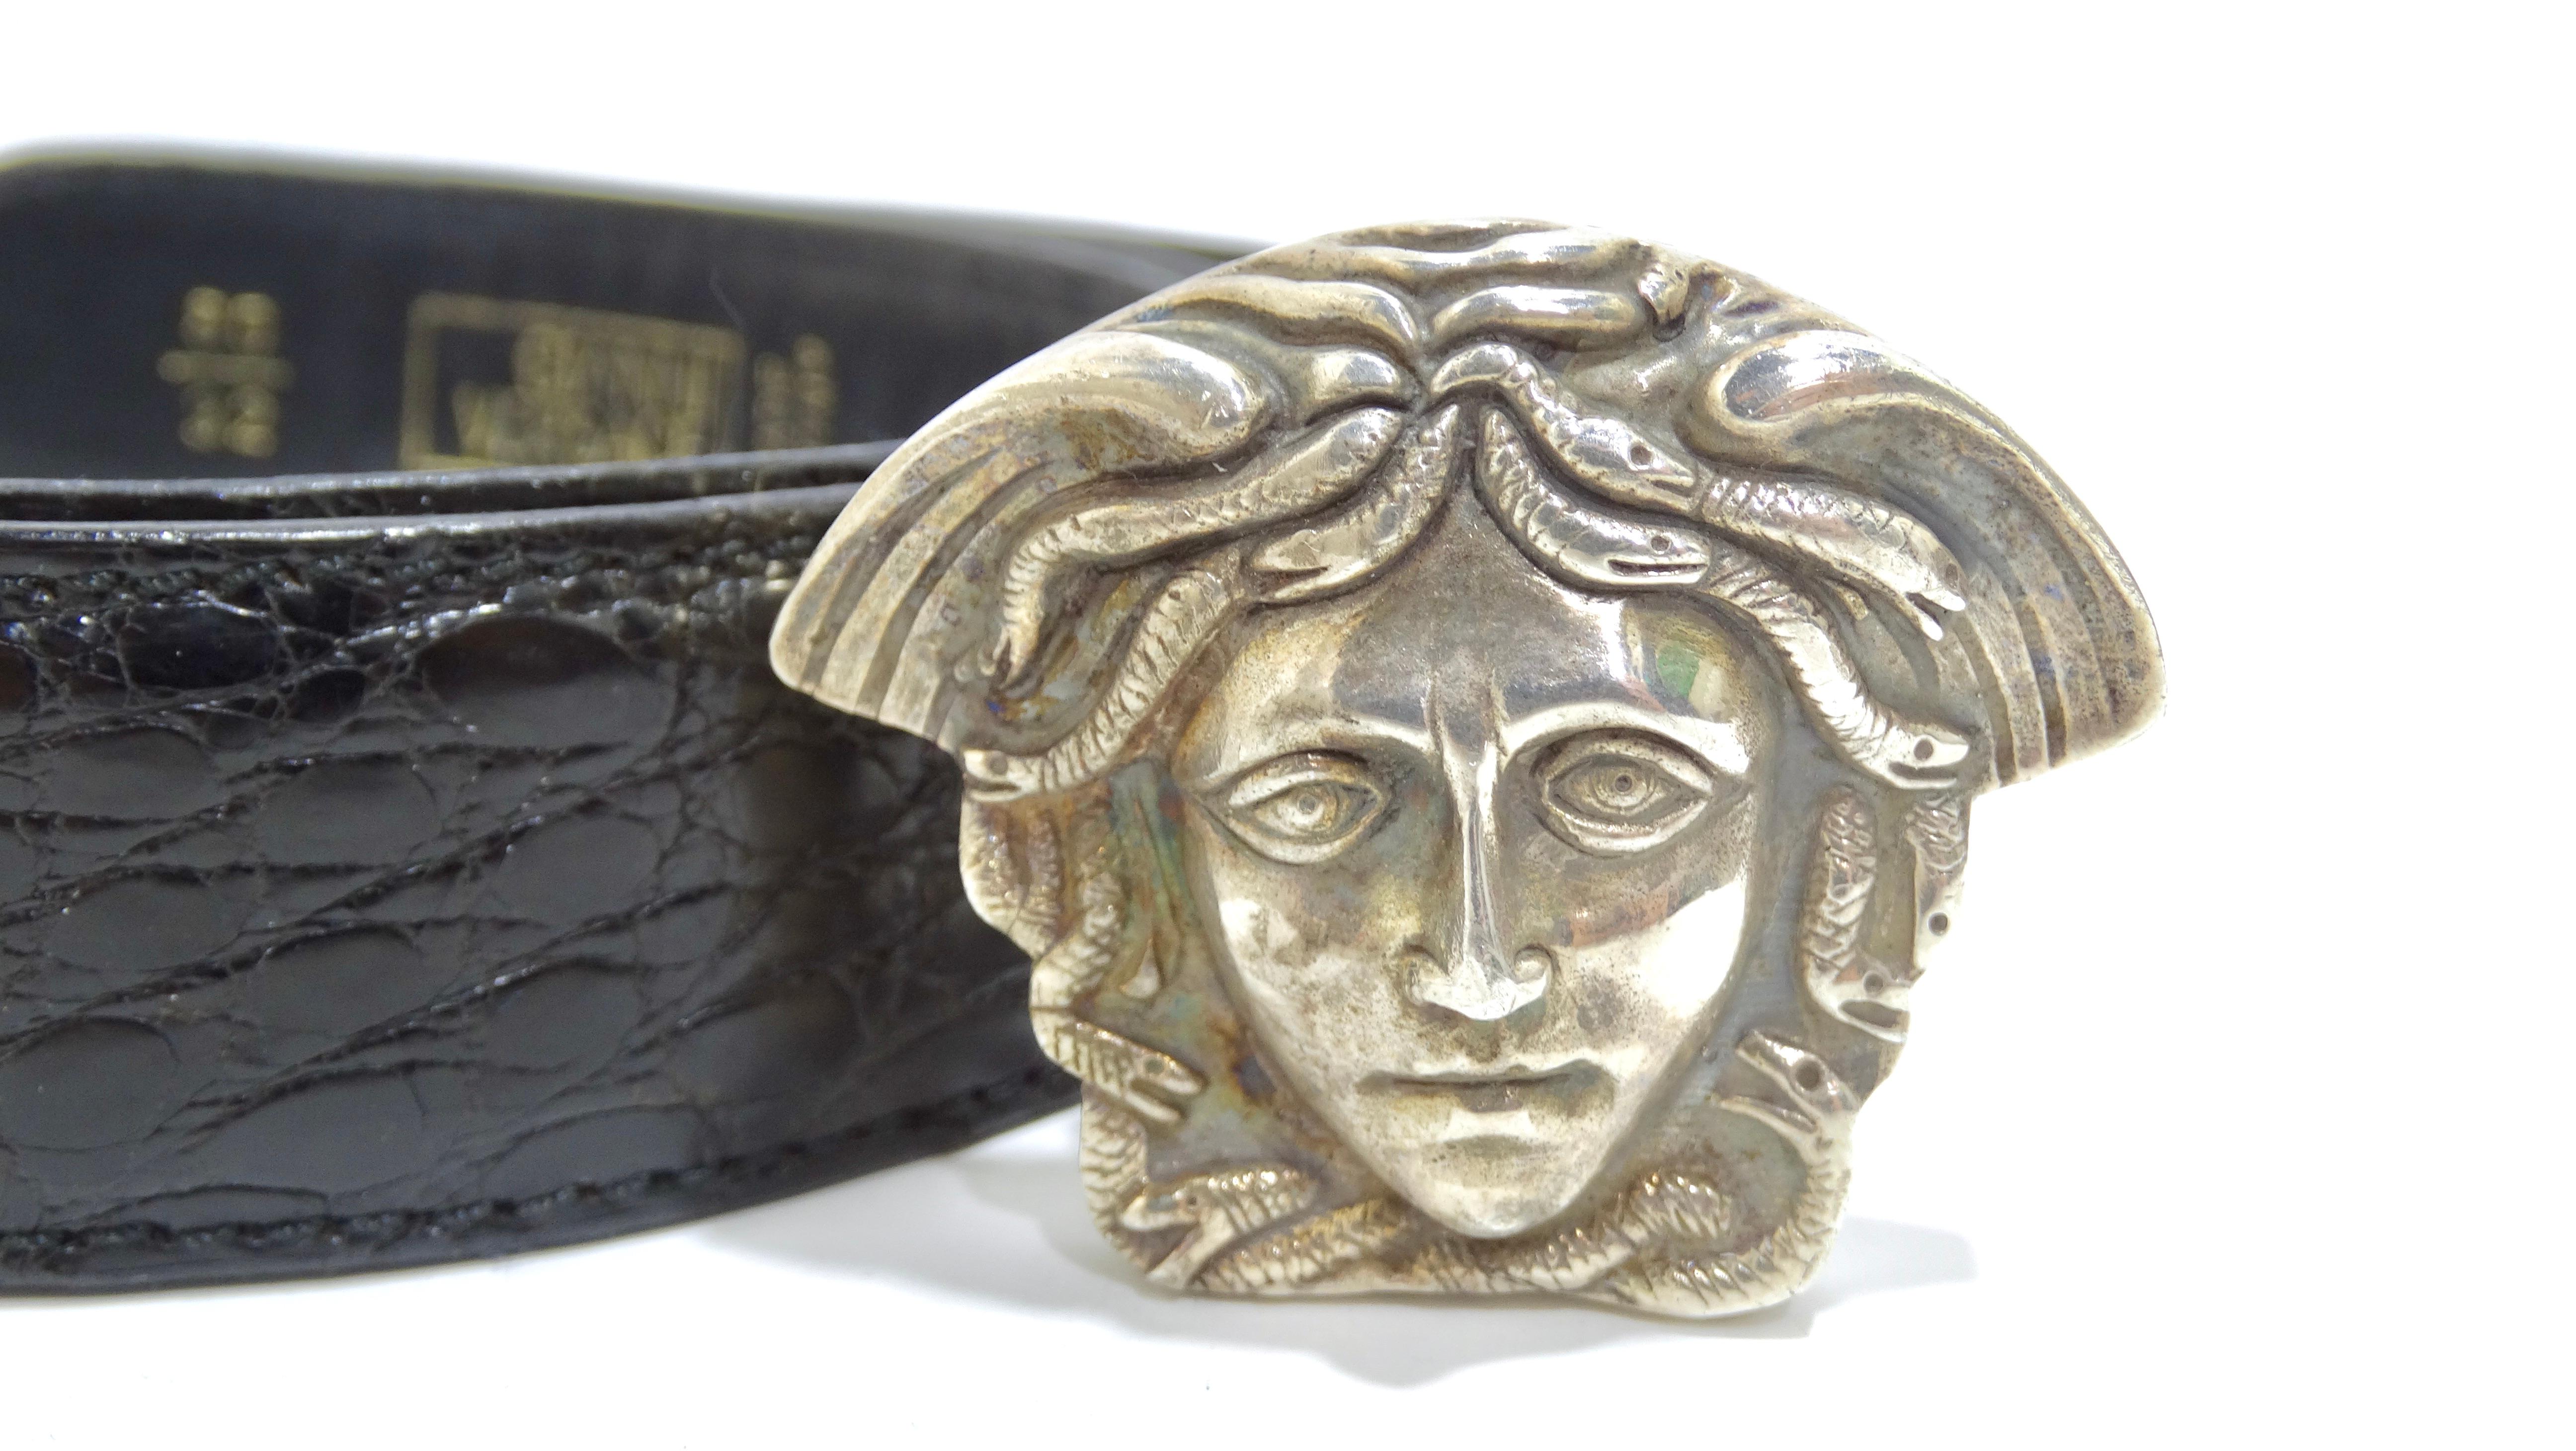 Gray Gianni Versace Silver-Toned Medusa Leather Belt For Sale